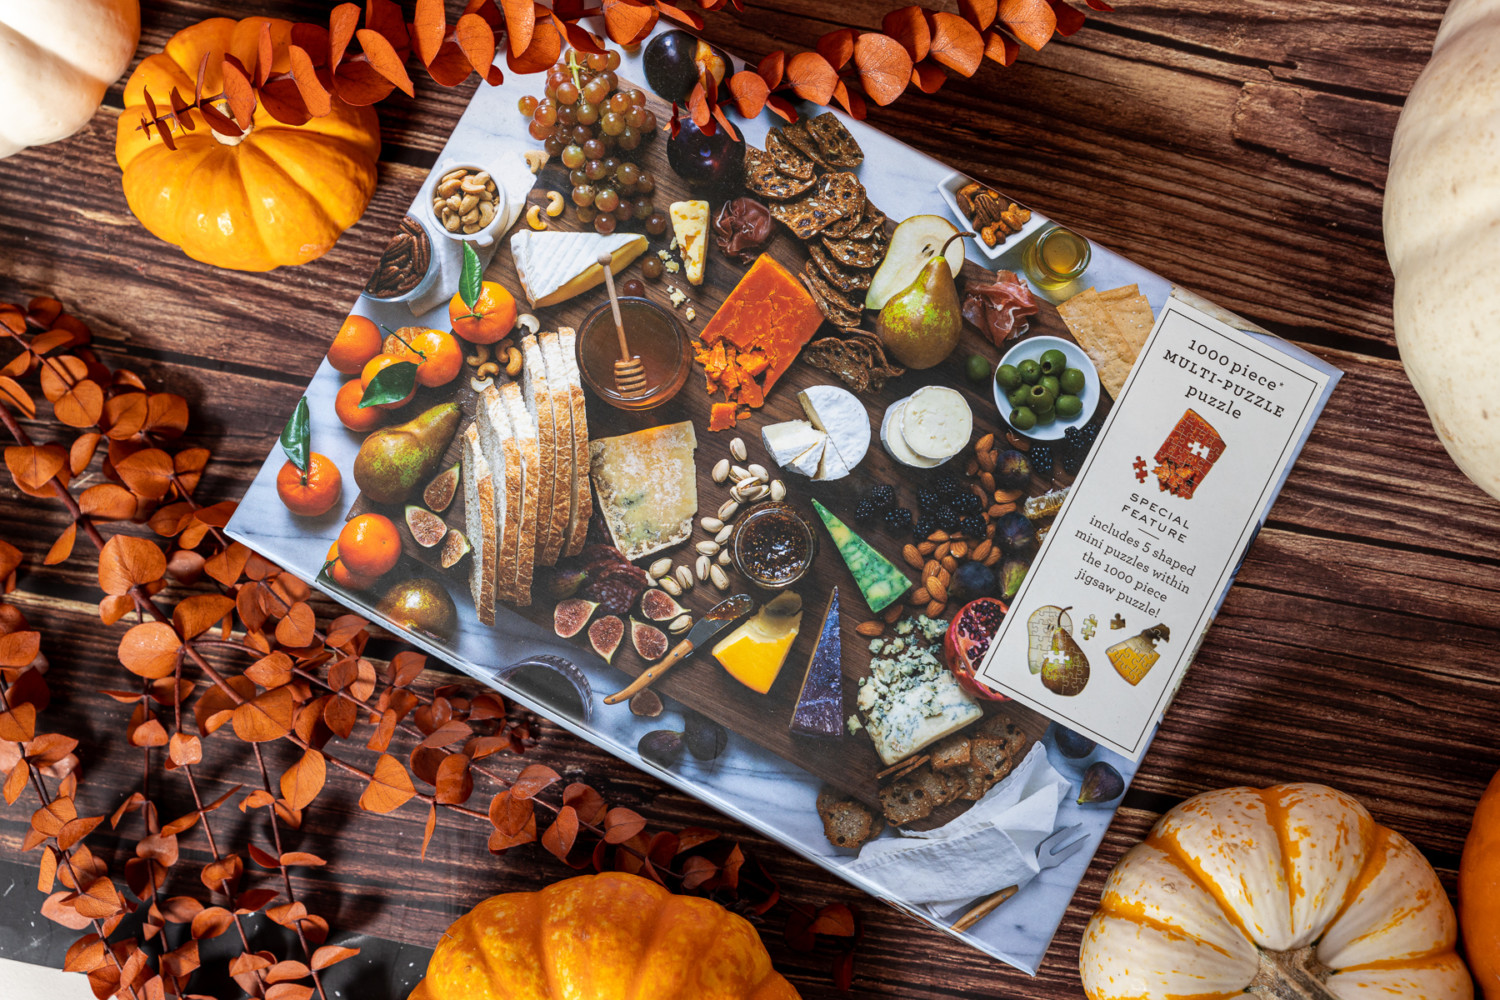 A 1000 piece puzzle box that featurers a charcuterie board photo, decorated with orange leaves and pumpkins with various sizes.